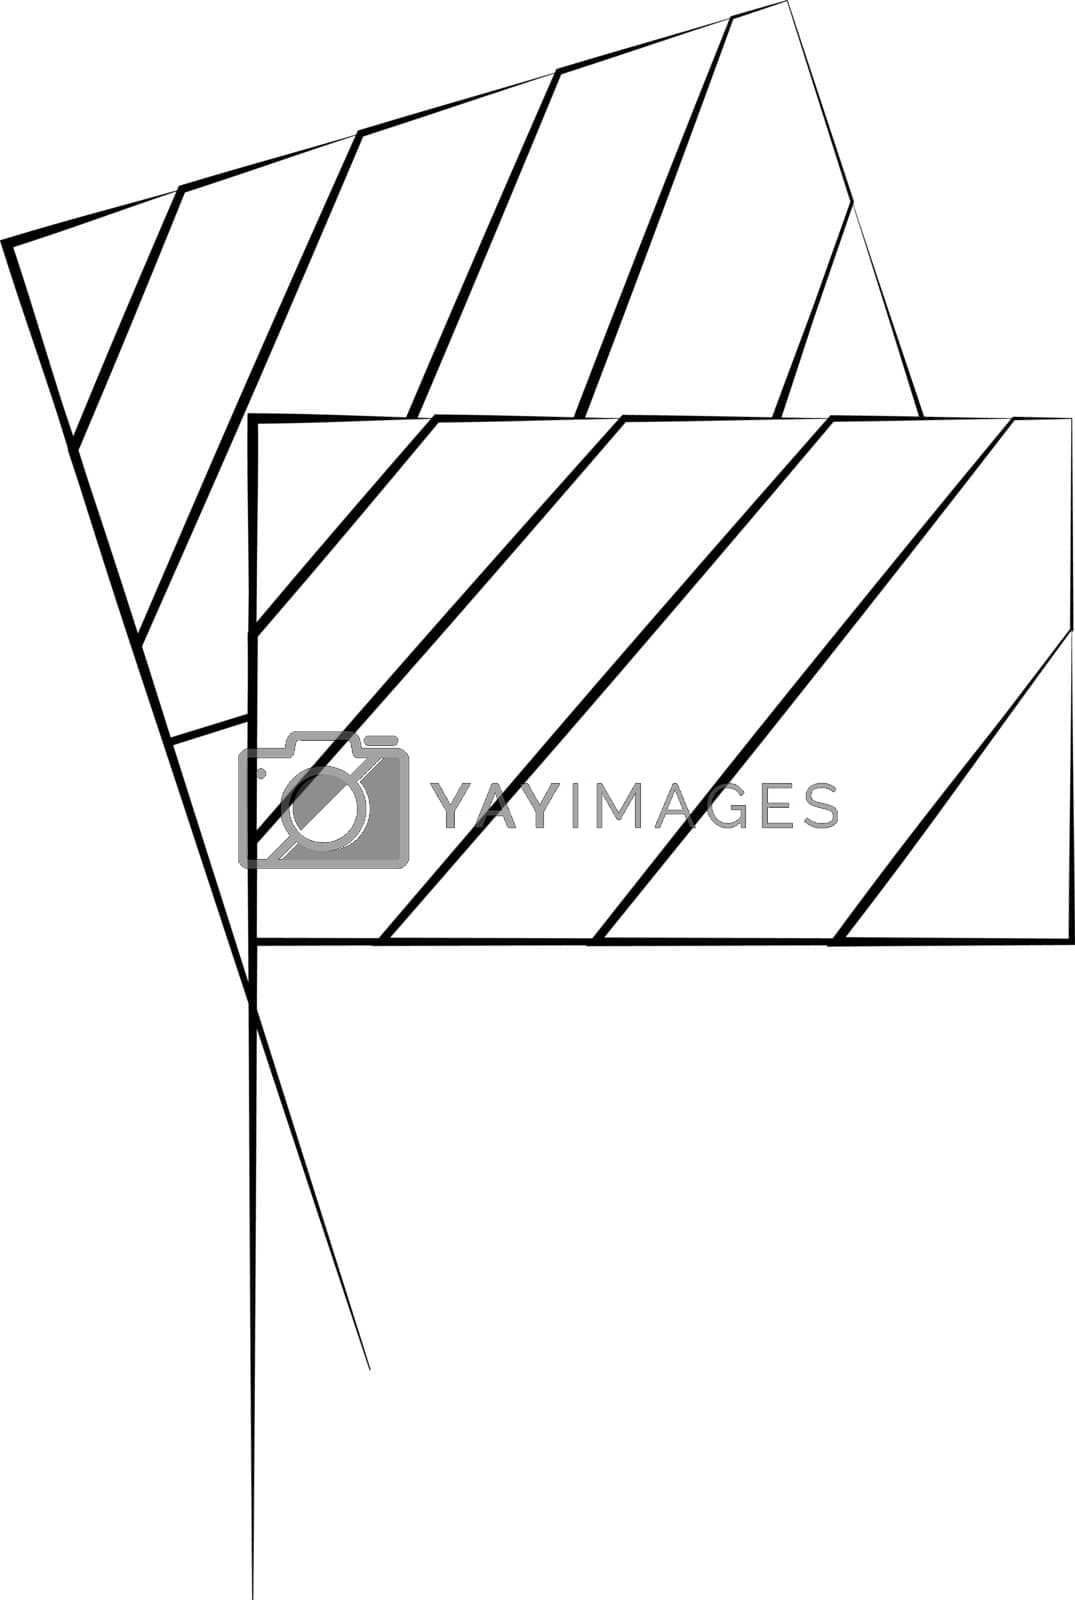 Royalty free image of Single element Flag Stick. Draw illustration in black and white by AnastasiaPen